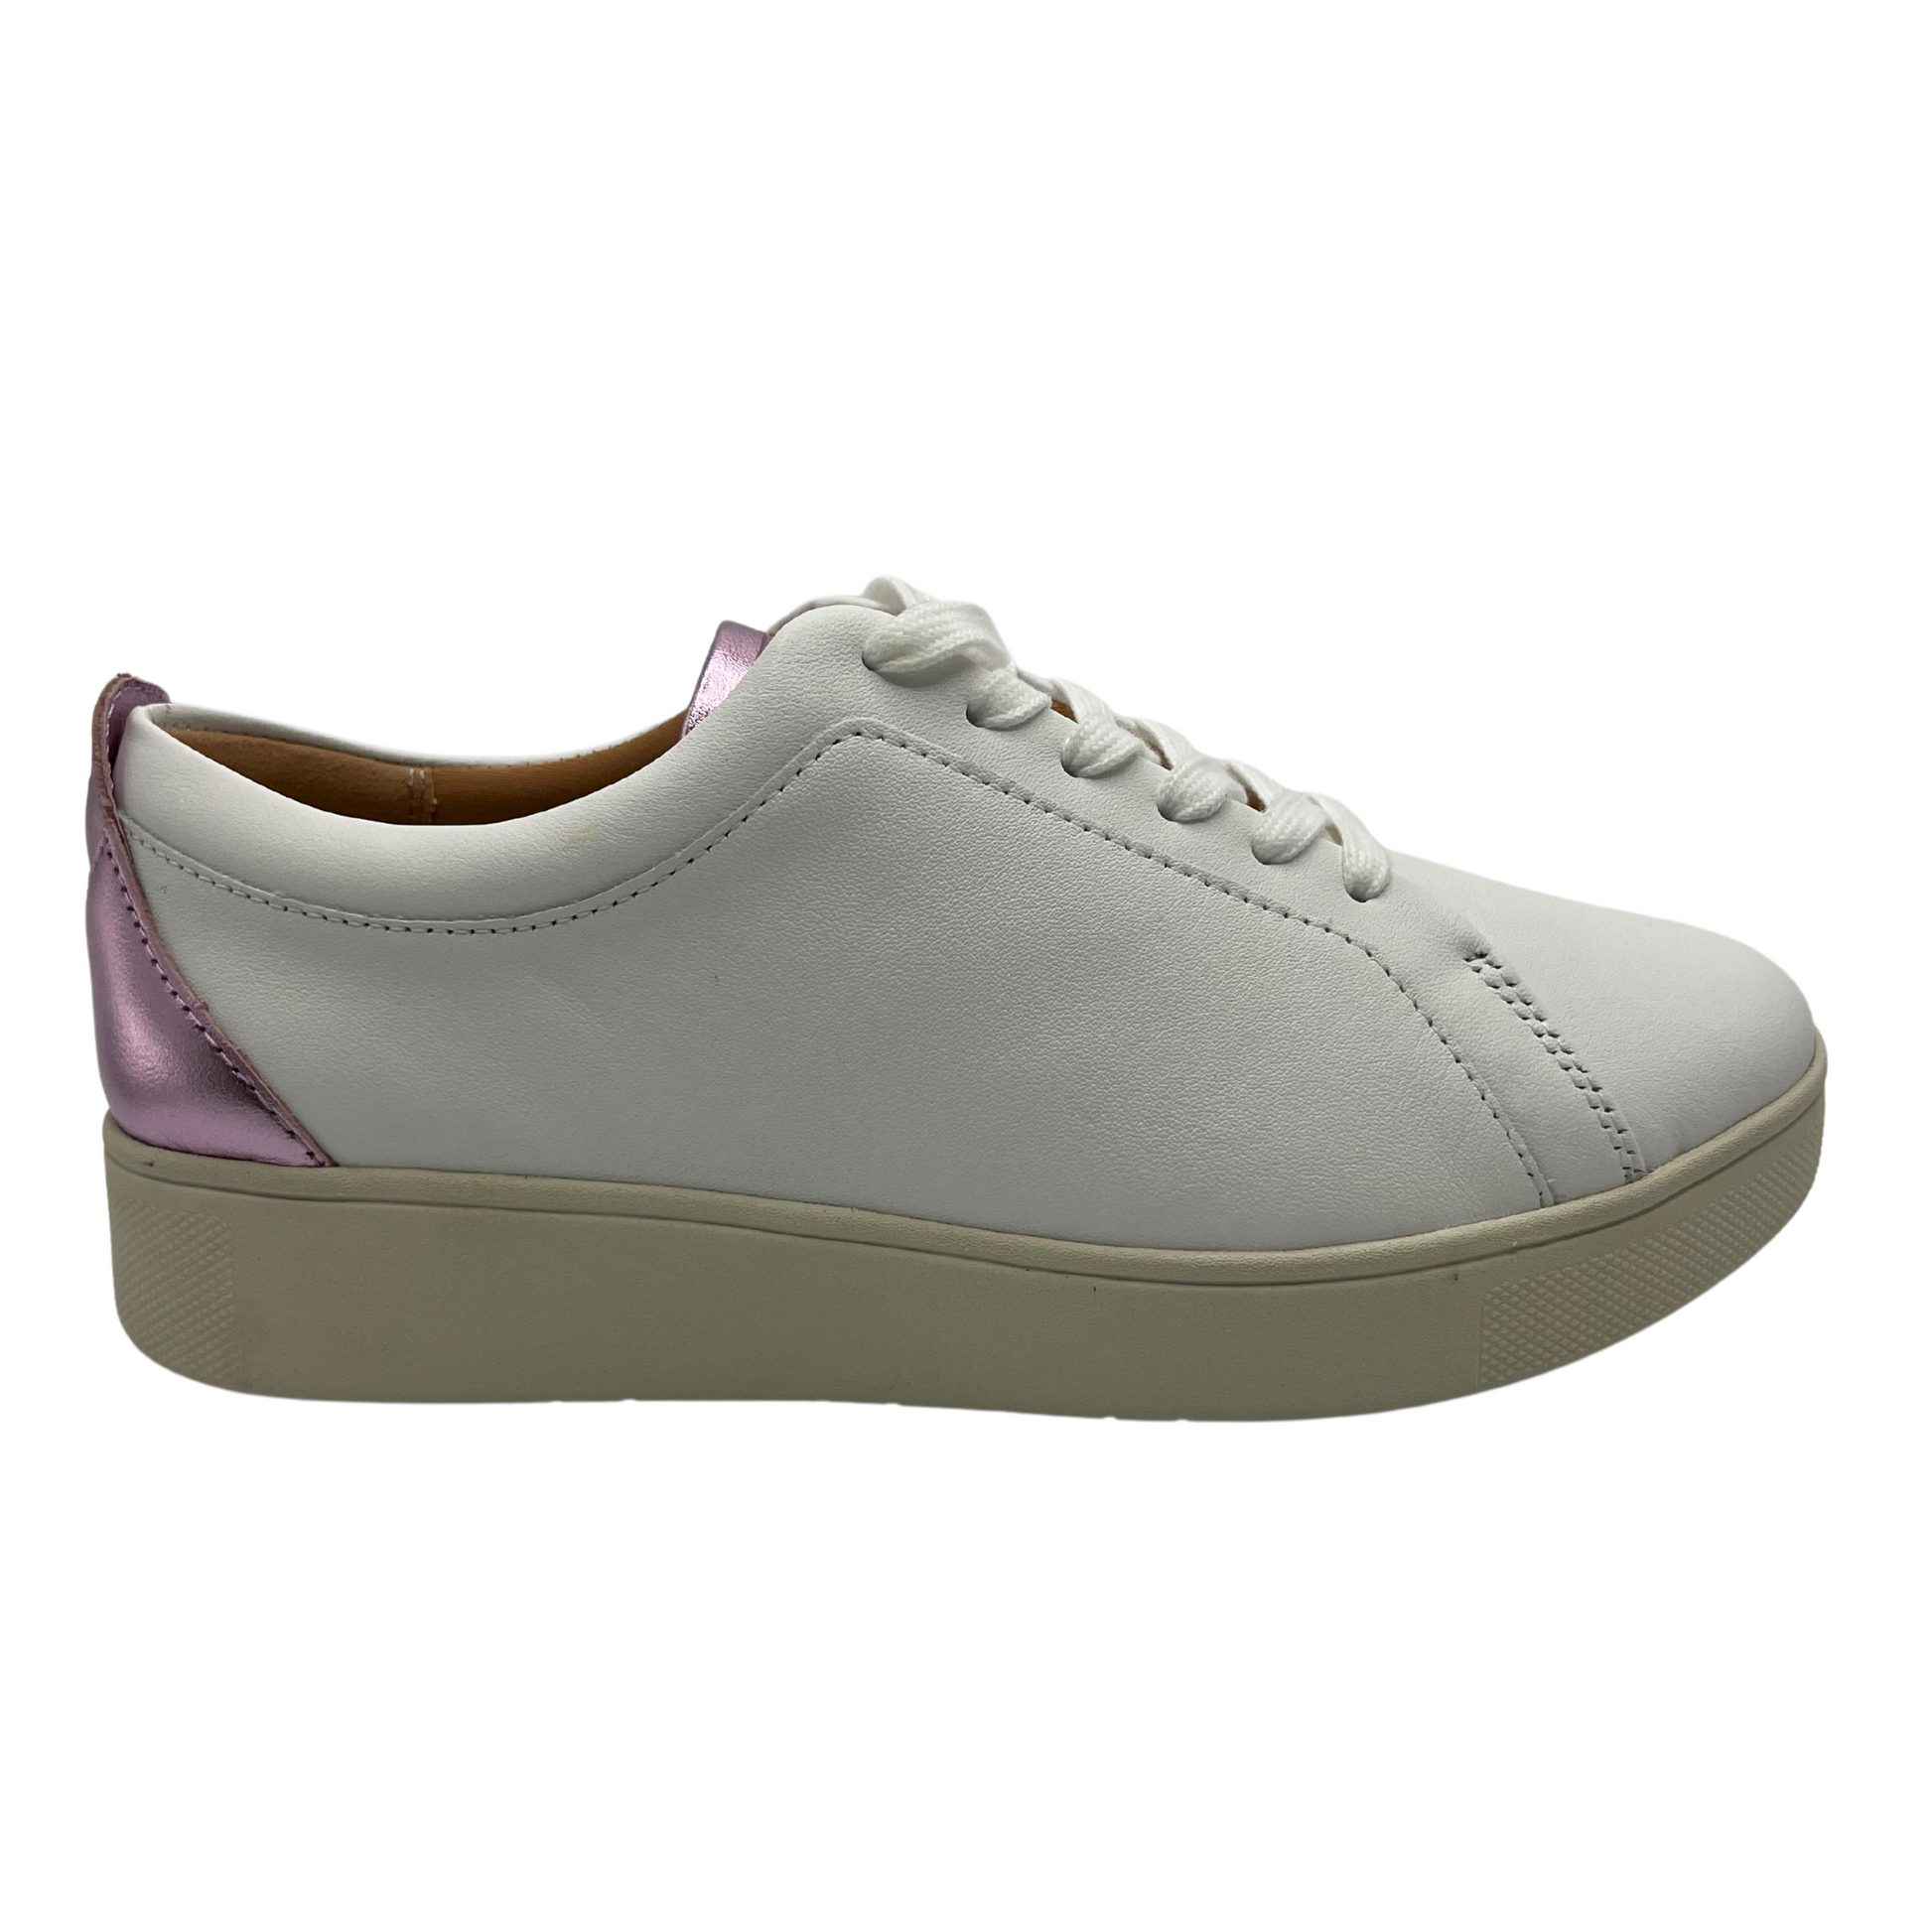 Right facing view of white leather sneakers with white laces, rubber outsole and metallic lilac detail on heel